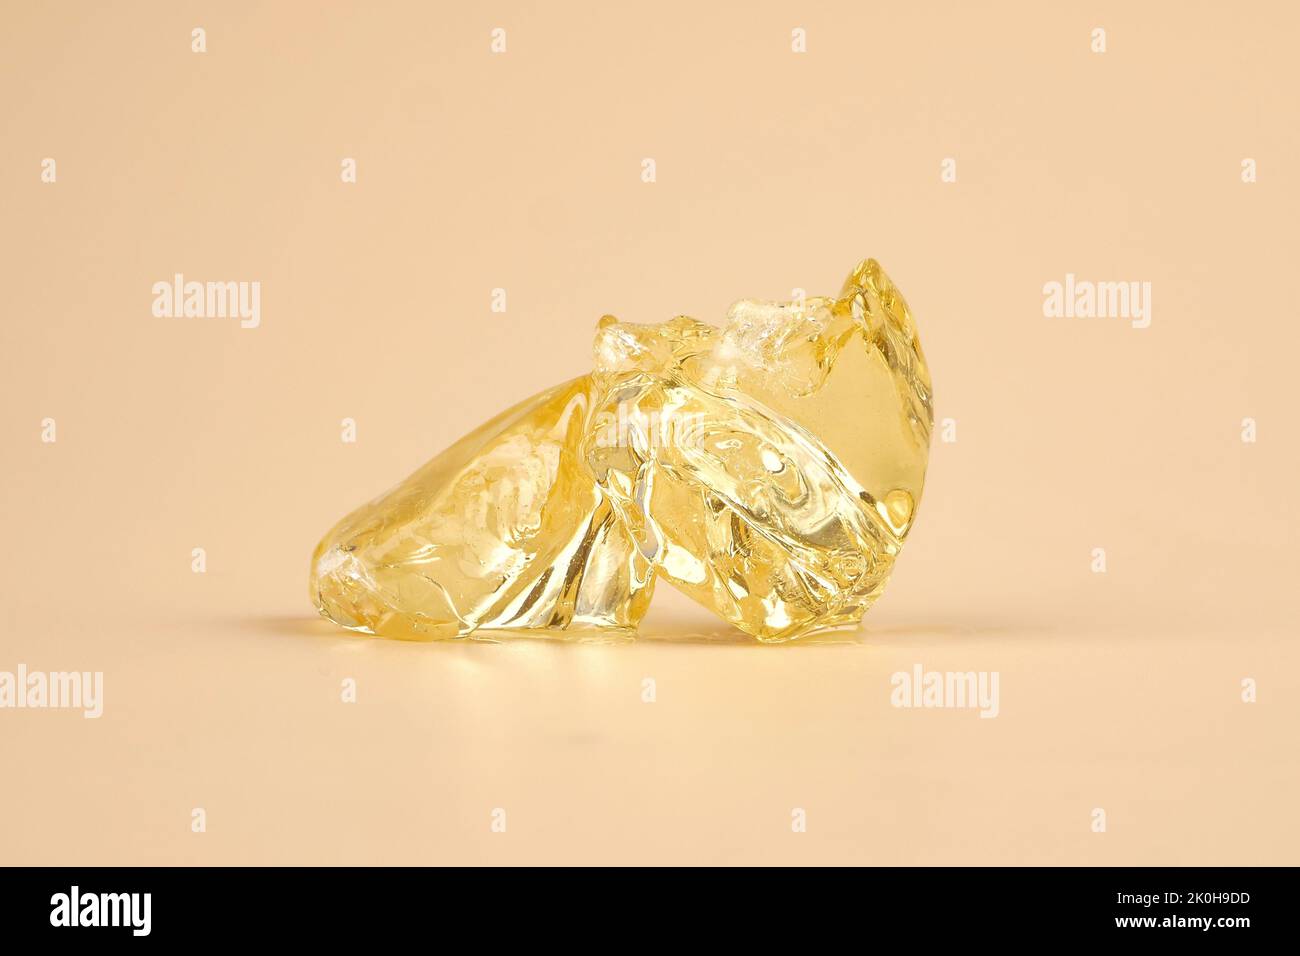 yellow wax piece with high THC, clear cannabis resin stone. Stock Photo